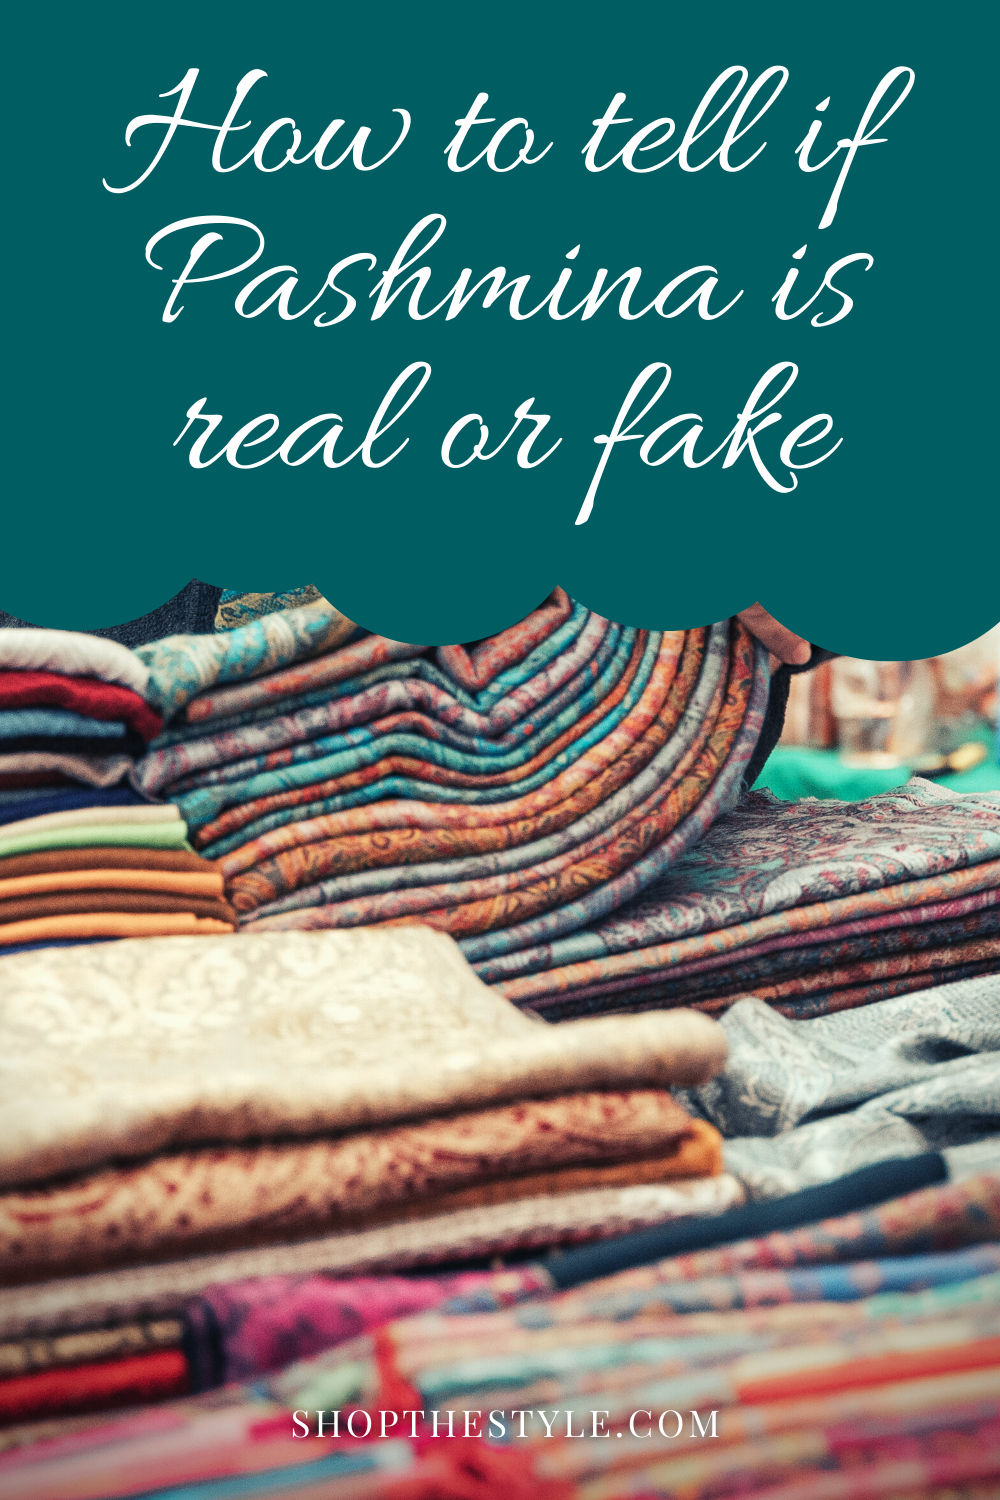 How To Tell If Pashmina Is Fake